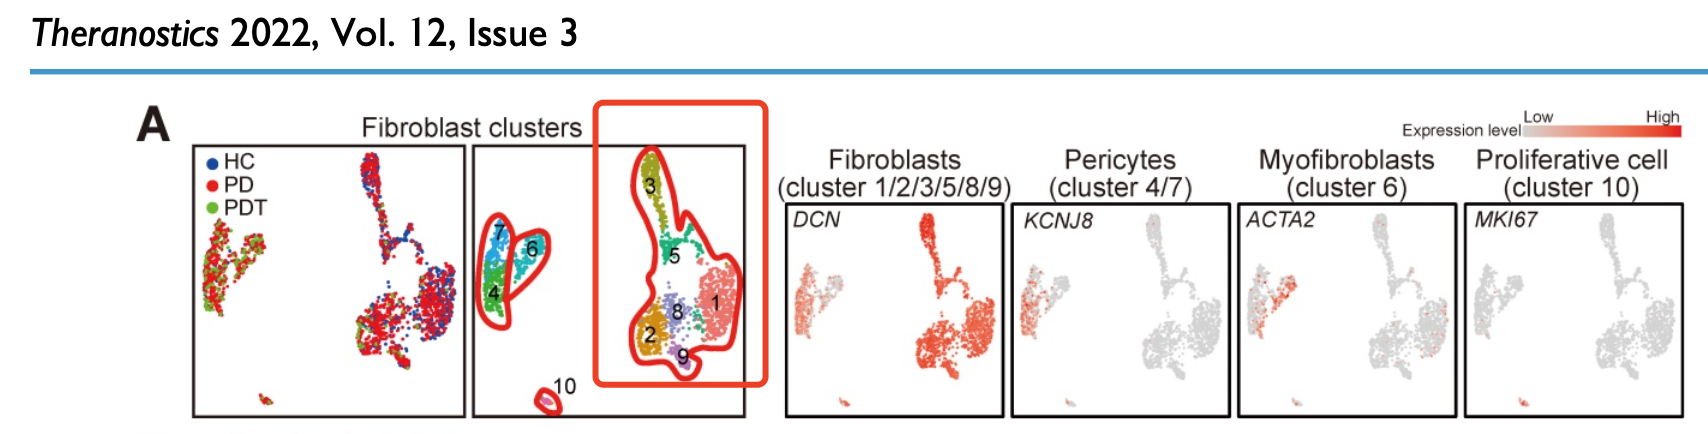 2194 fibroblasts (as in Figure 1A), 